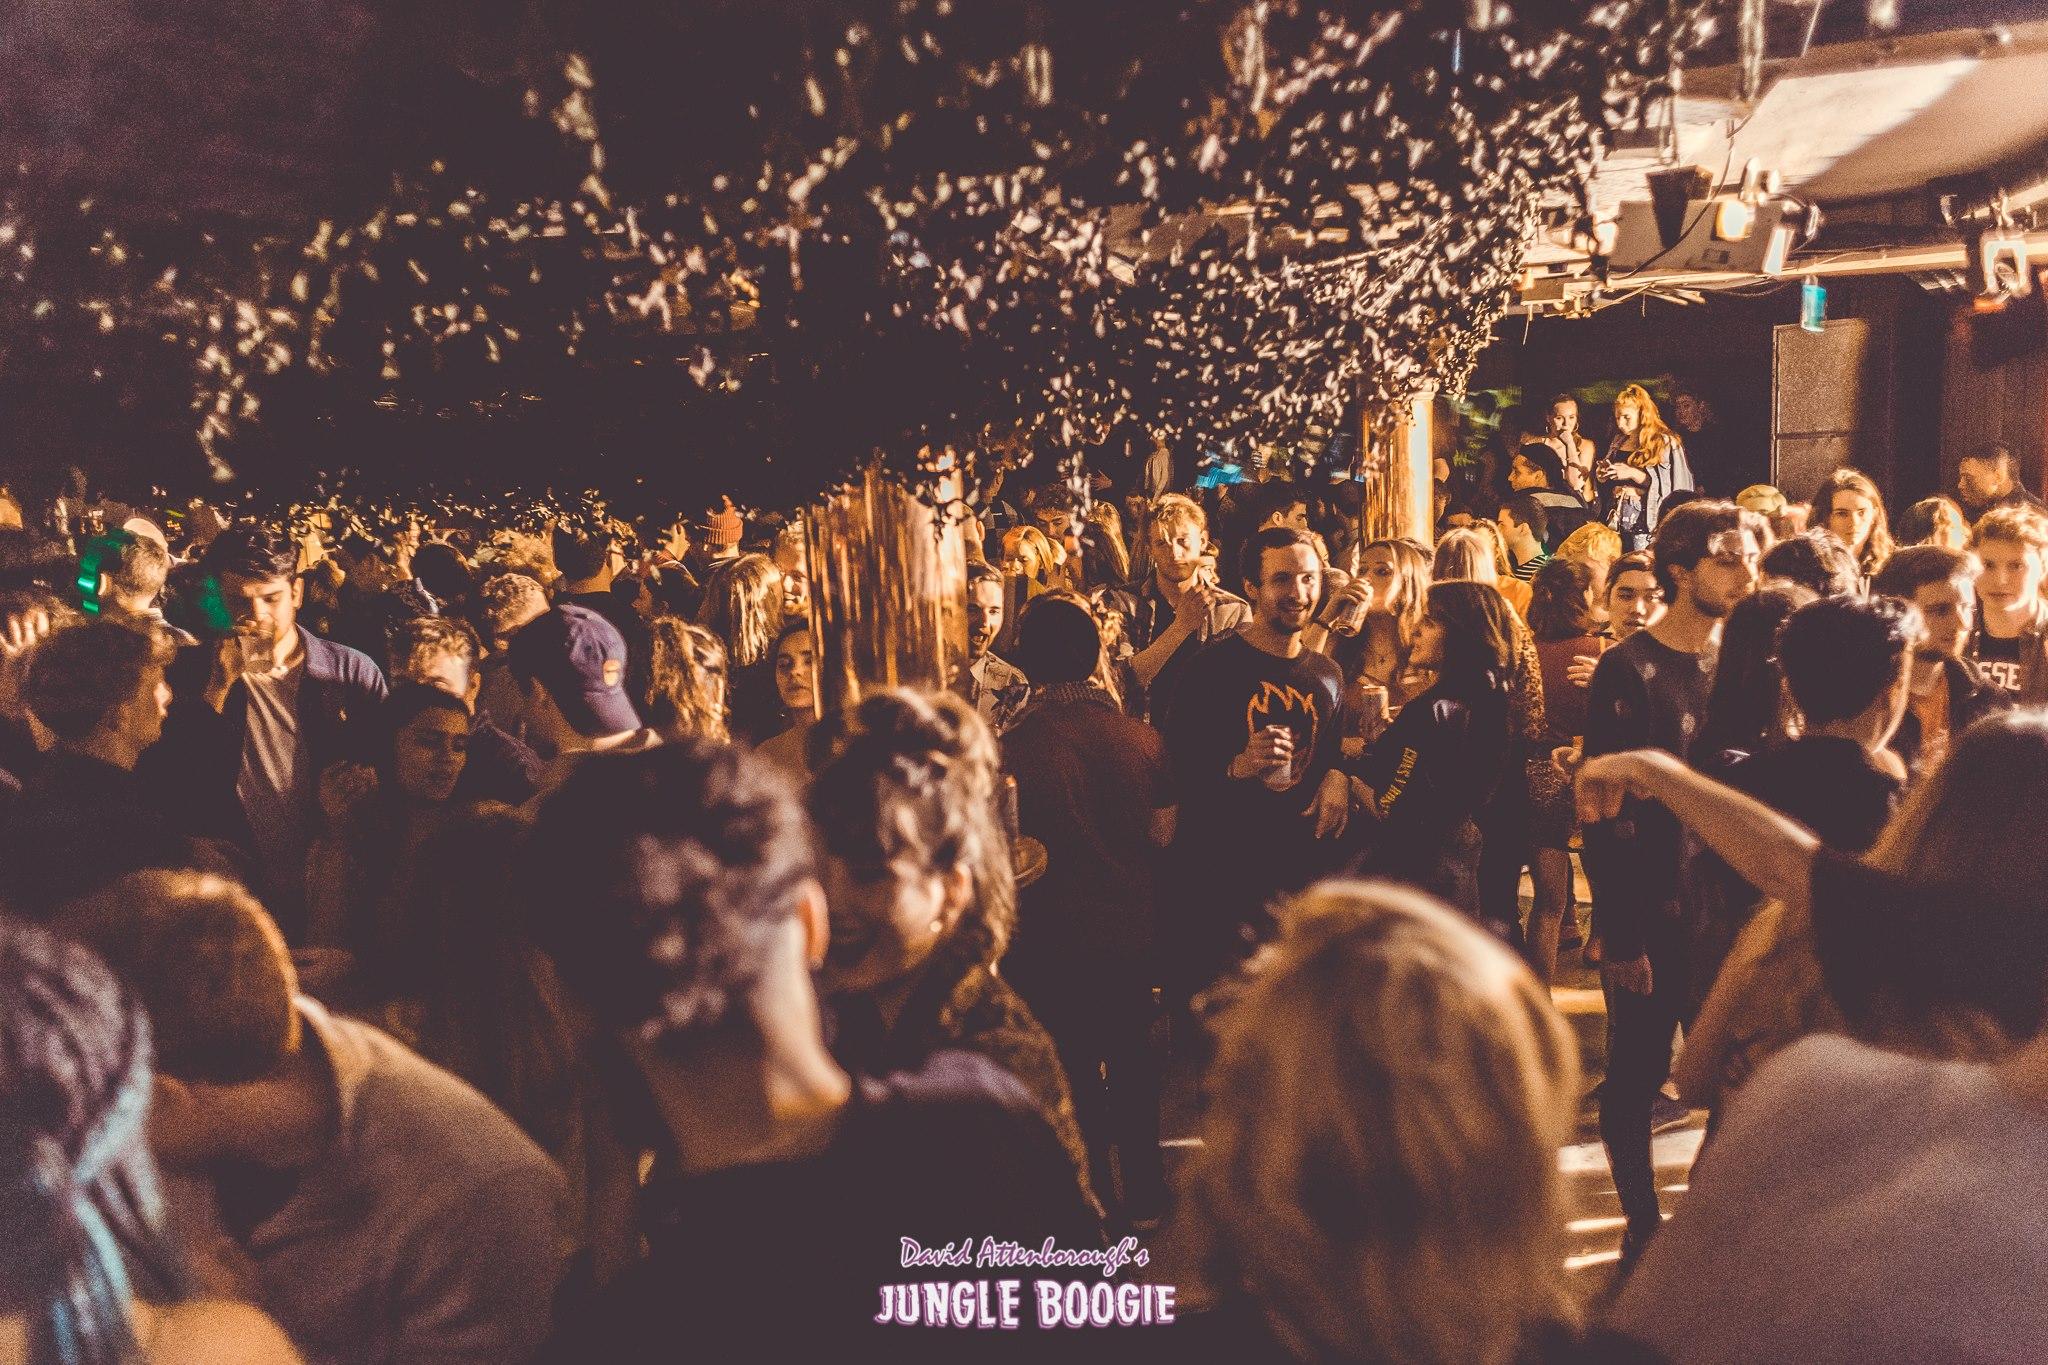 The Sir David Attenborough-themed club night, 'Jungle Boogie', was created by students at Leeds University